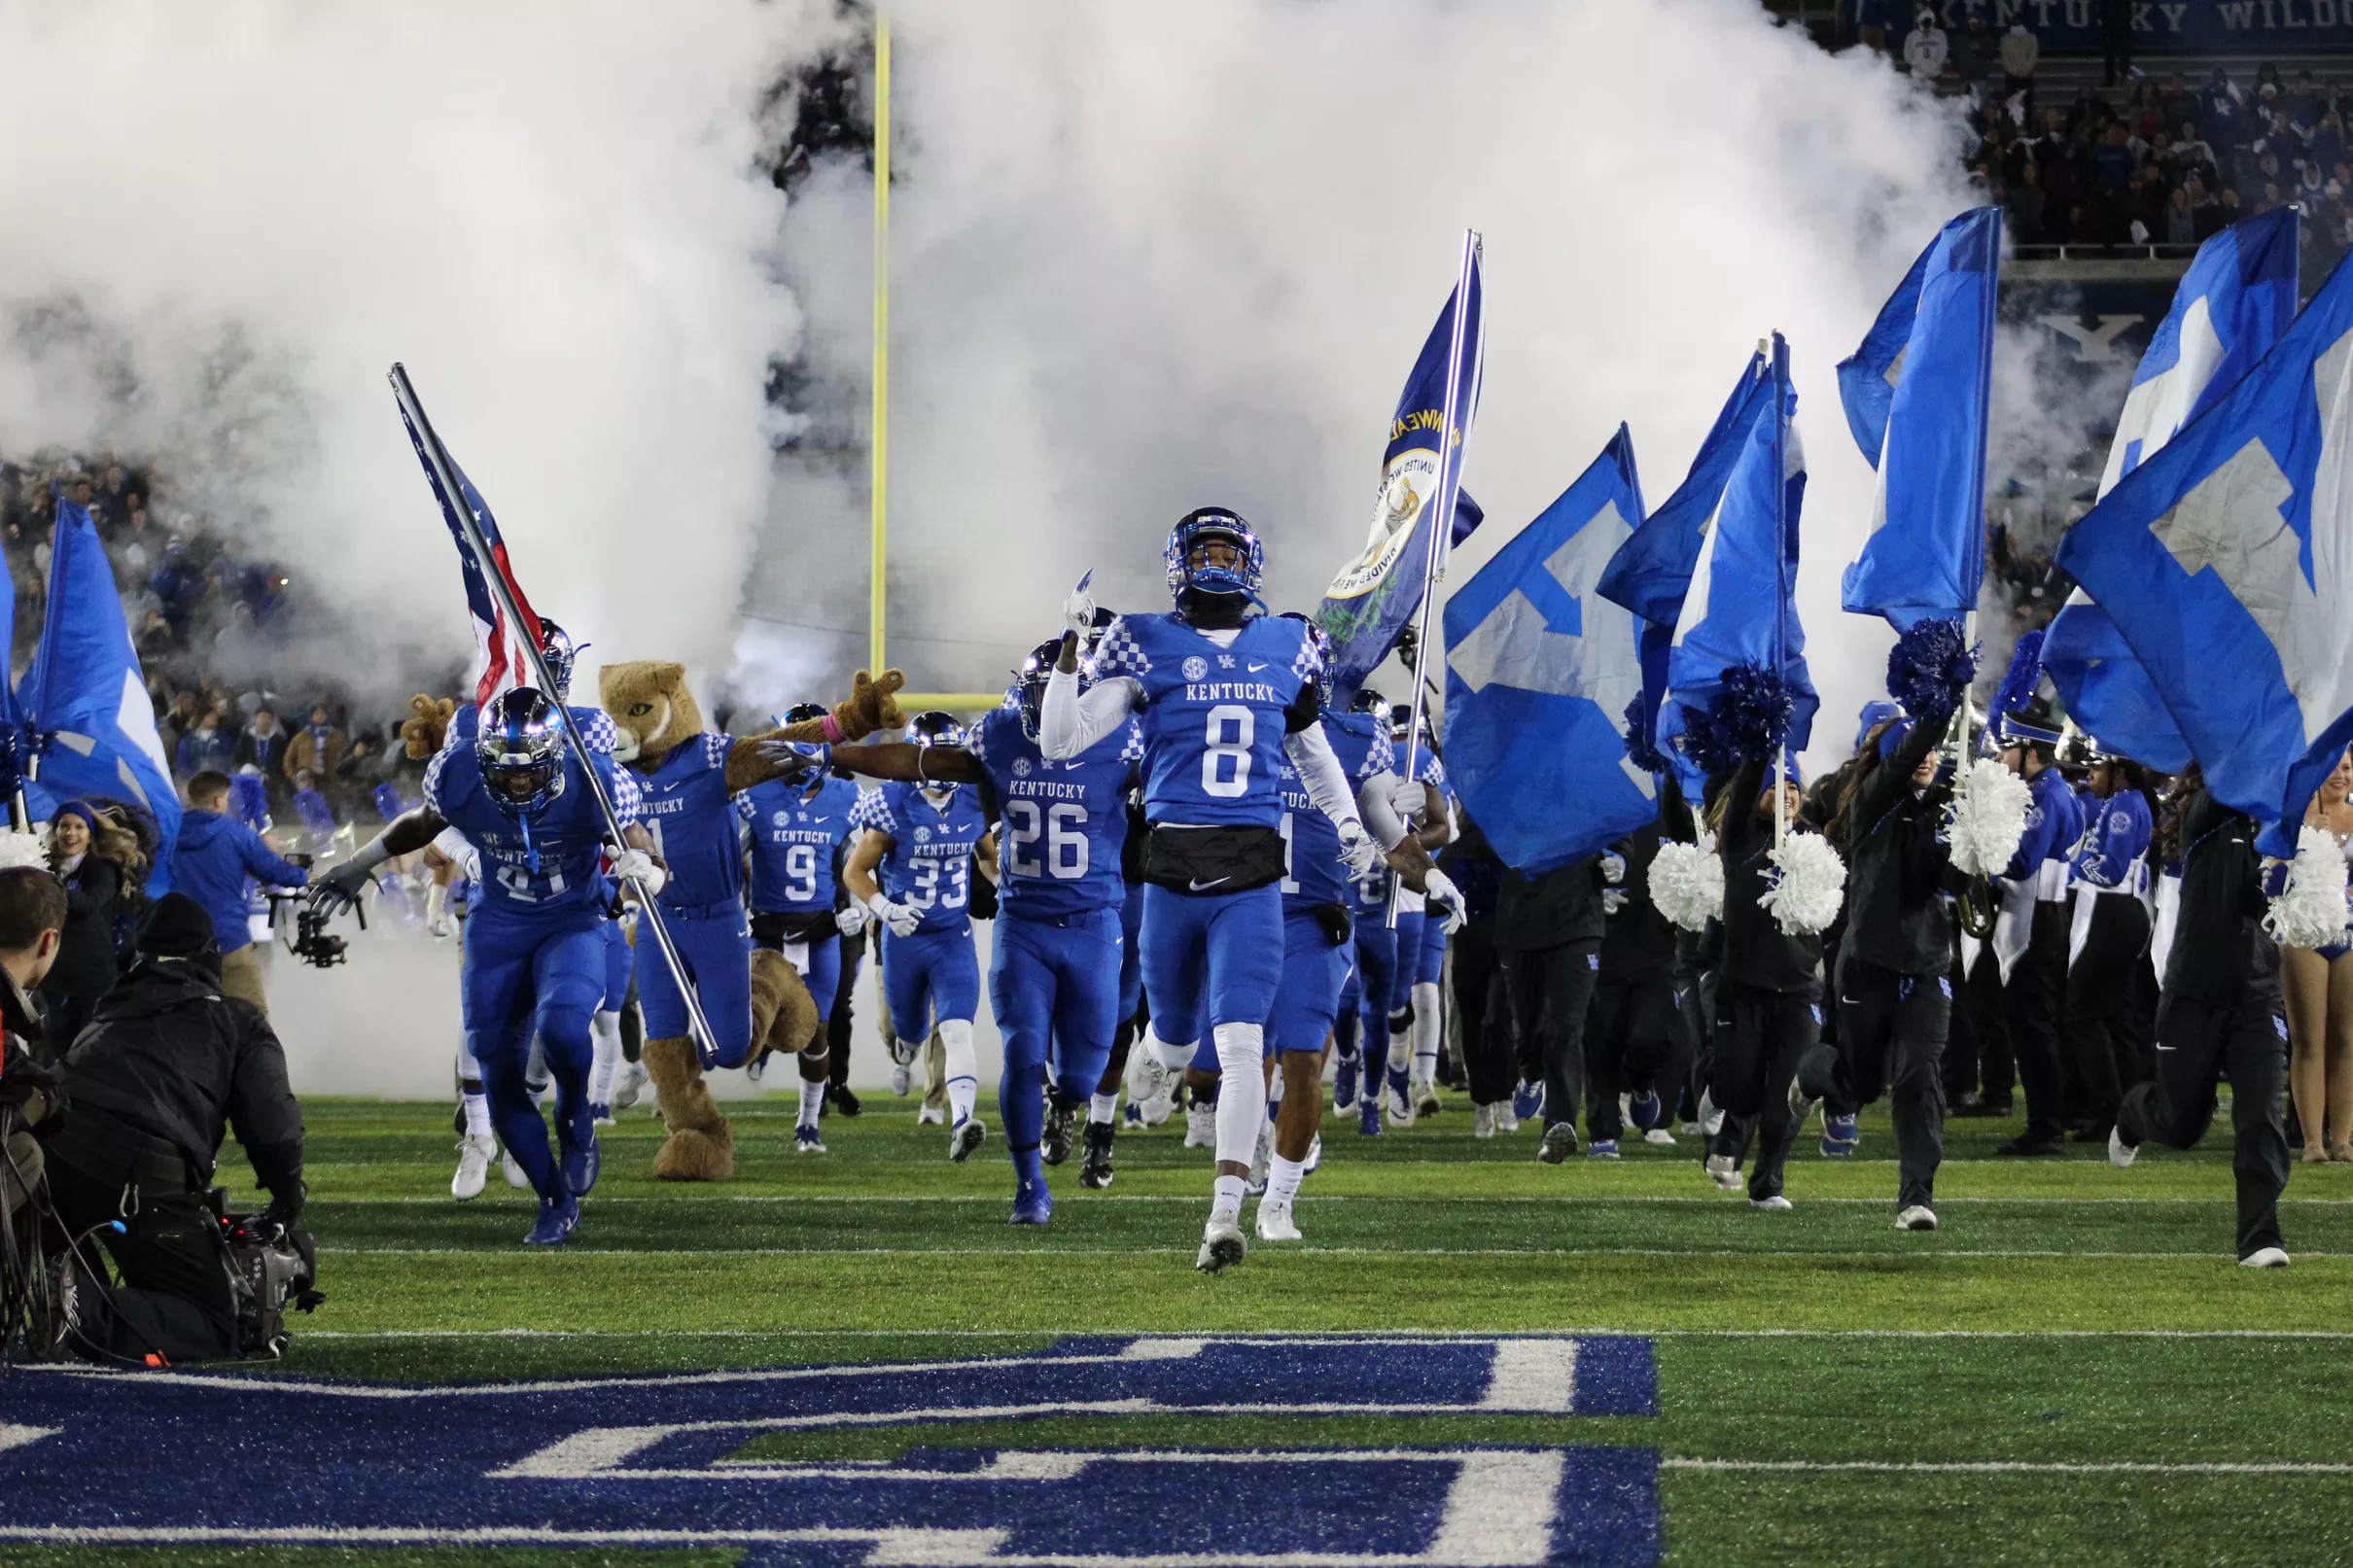 Kentucky Football What’s your prediction for spring game attendance?